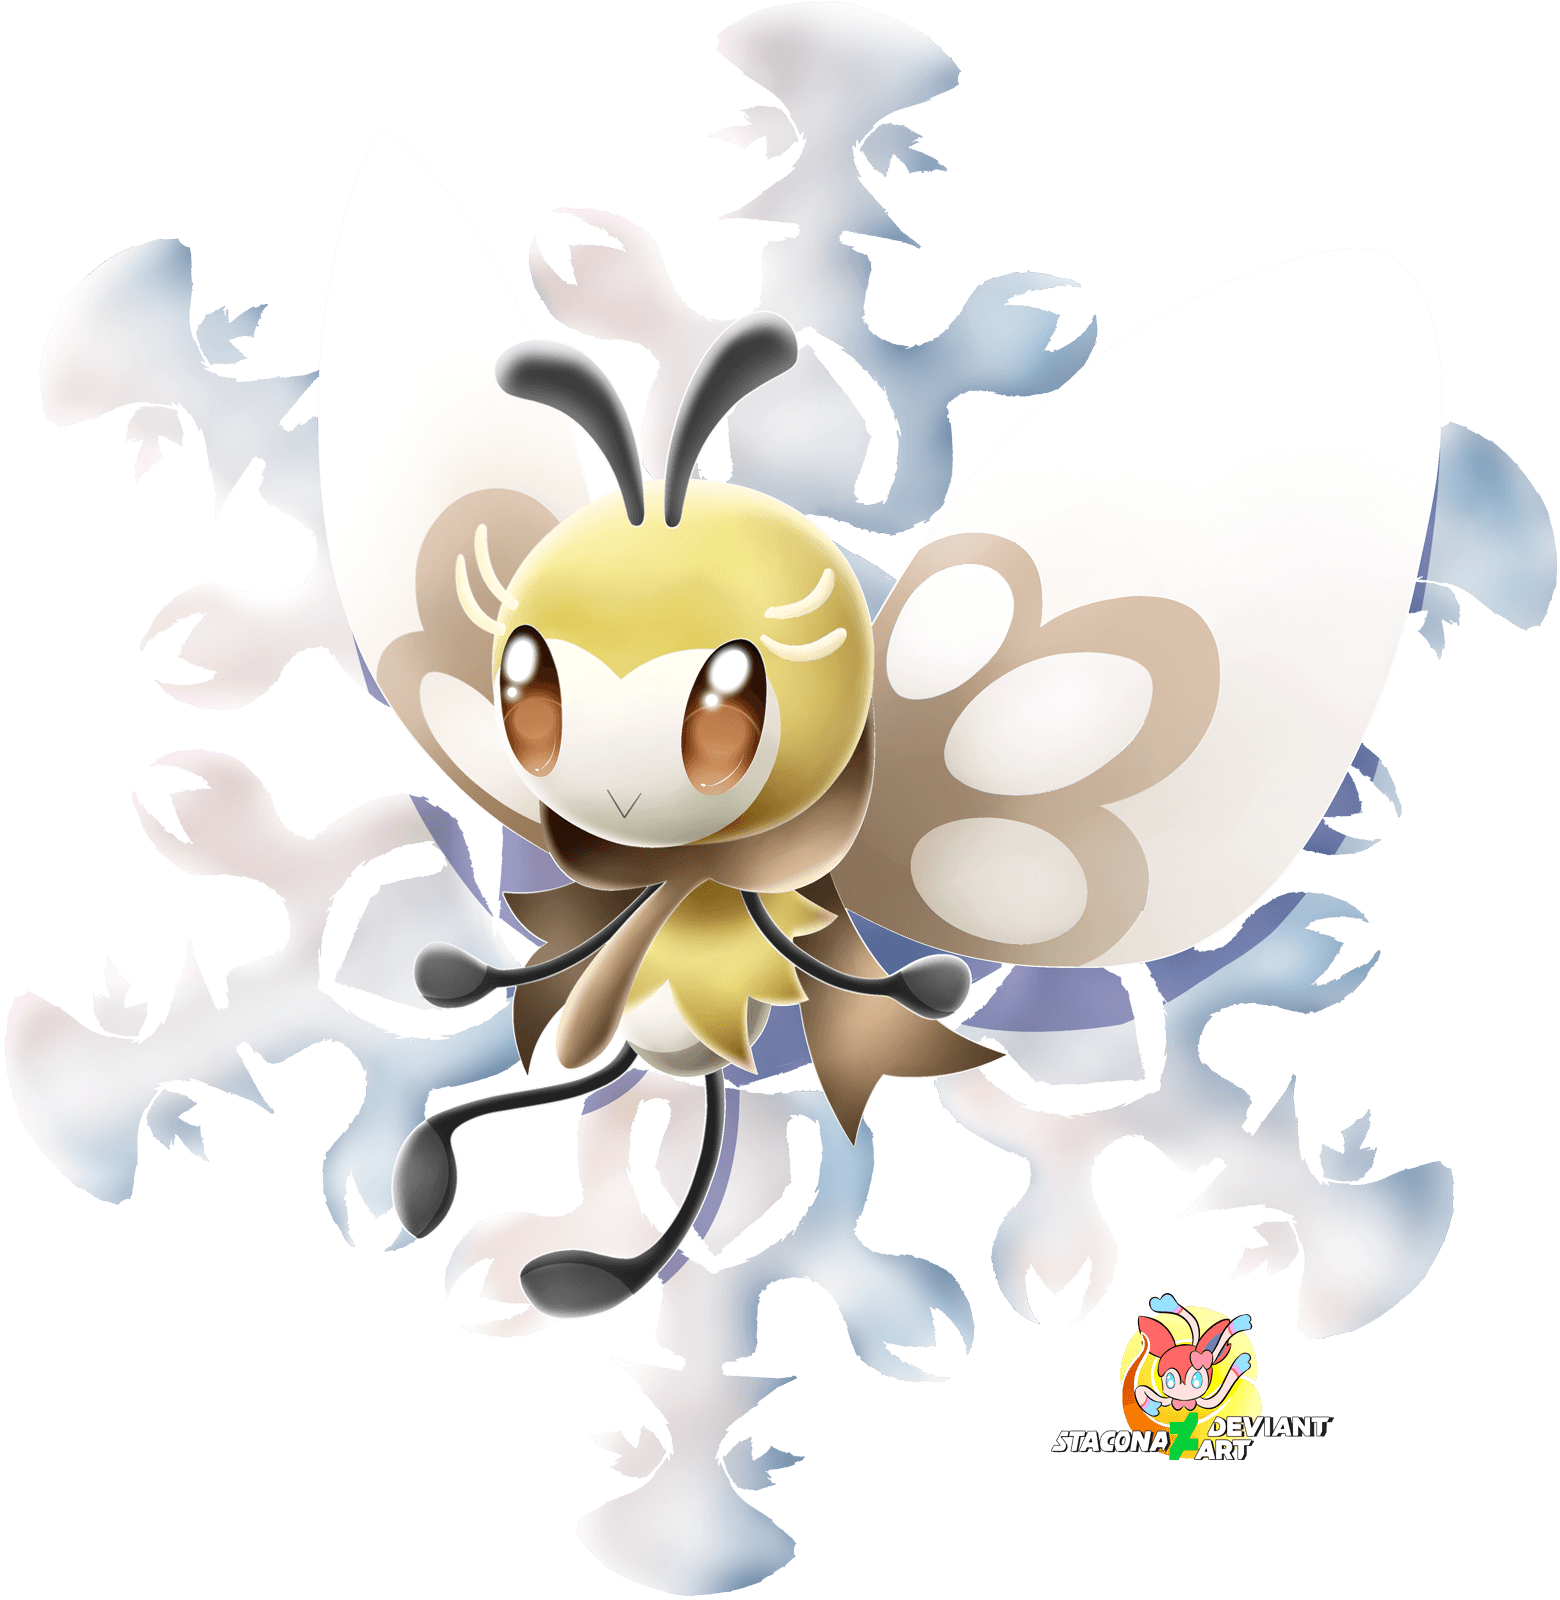 Ribombee Hd Wallpapers